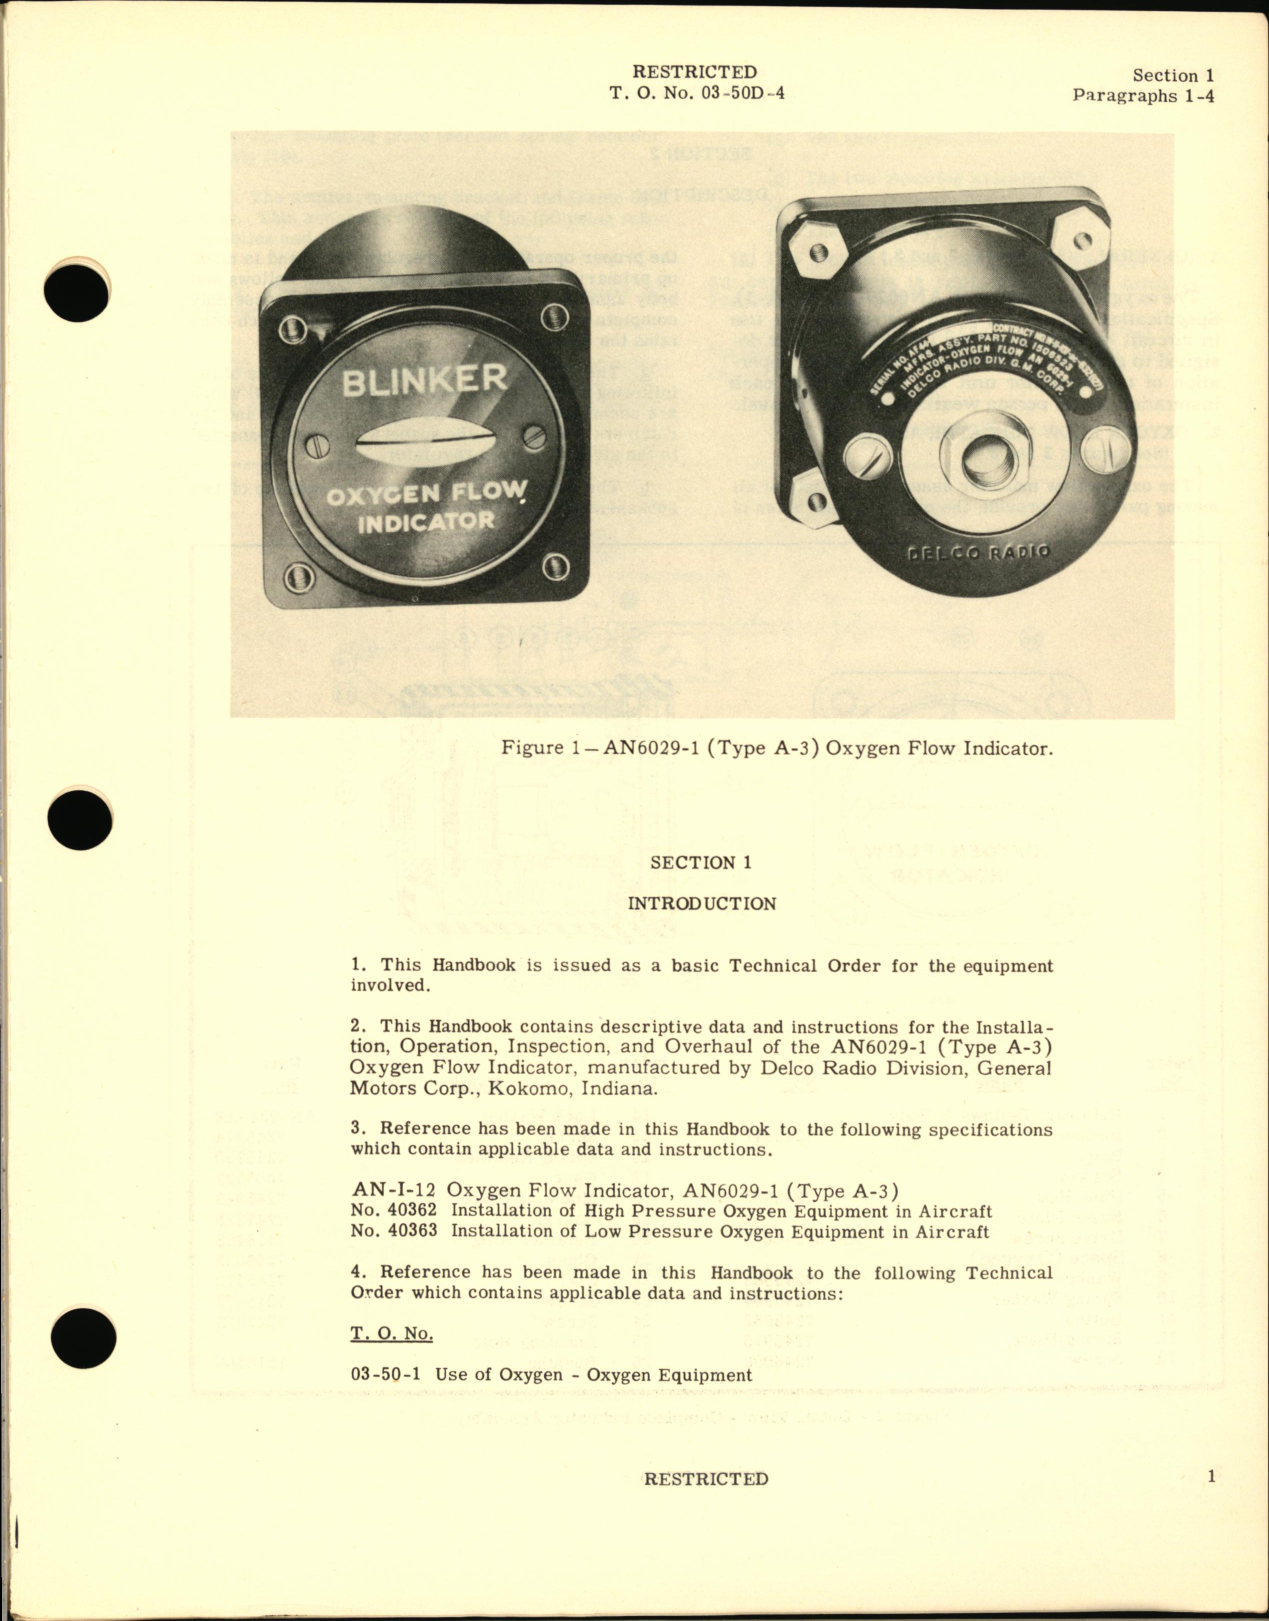 Sample page 5 from AirCorps Library document: Operation, Service and Overhaul Instructions with Parts Catalog for Oxygen Flow Indicator Type A-3